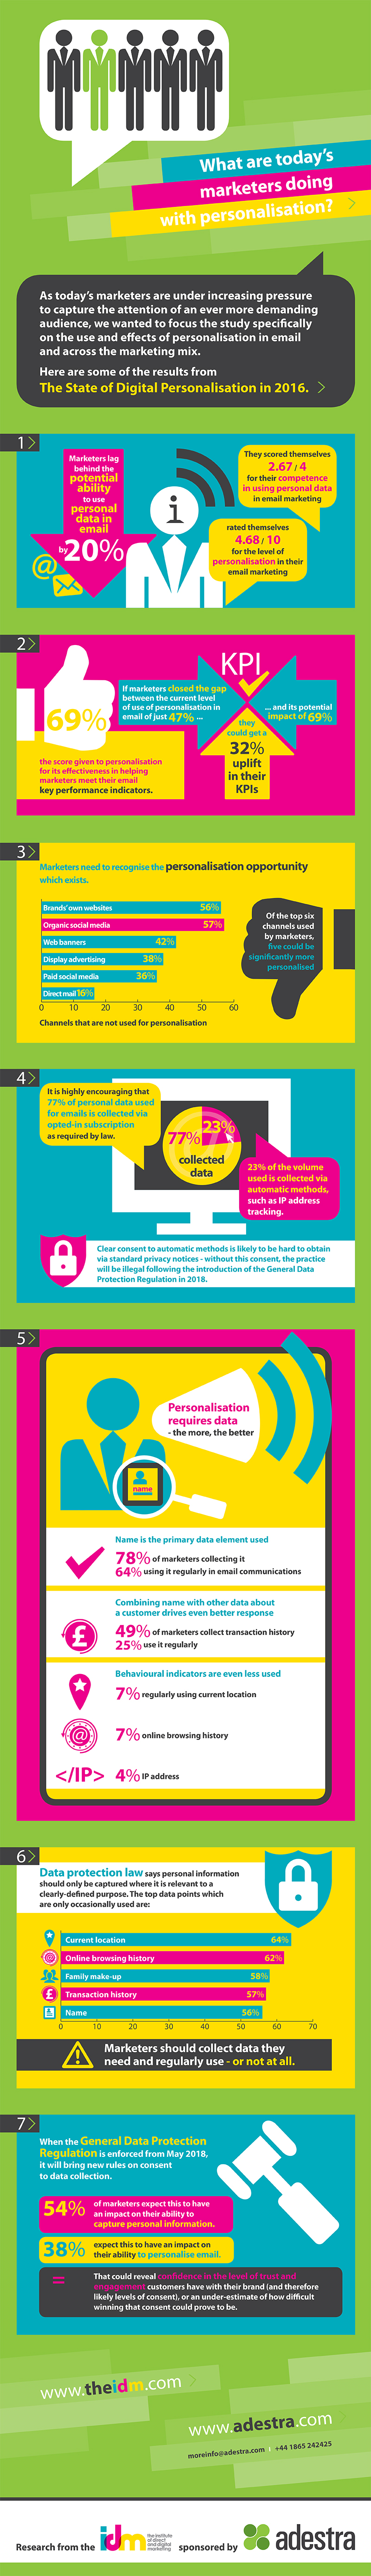 infographic article: add personalisation to marketing arsenal